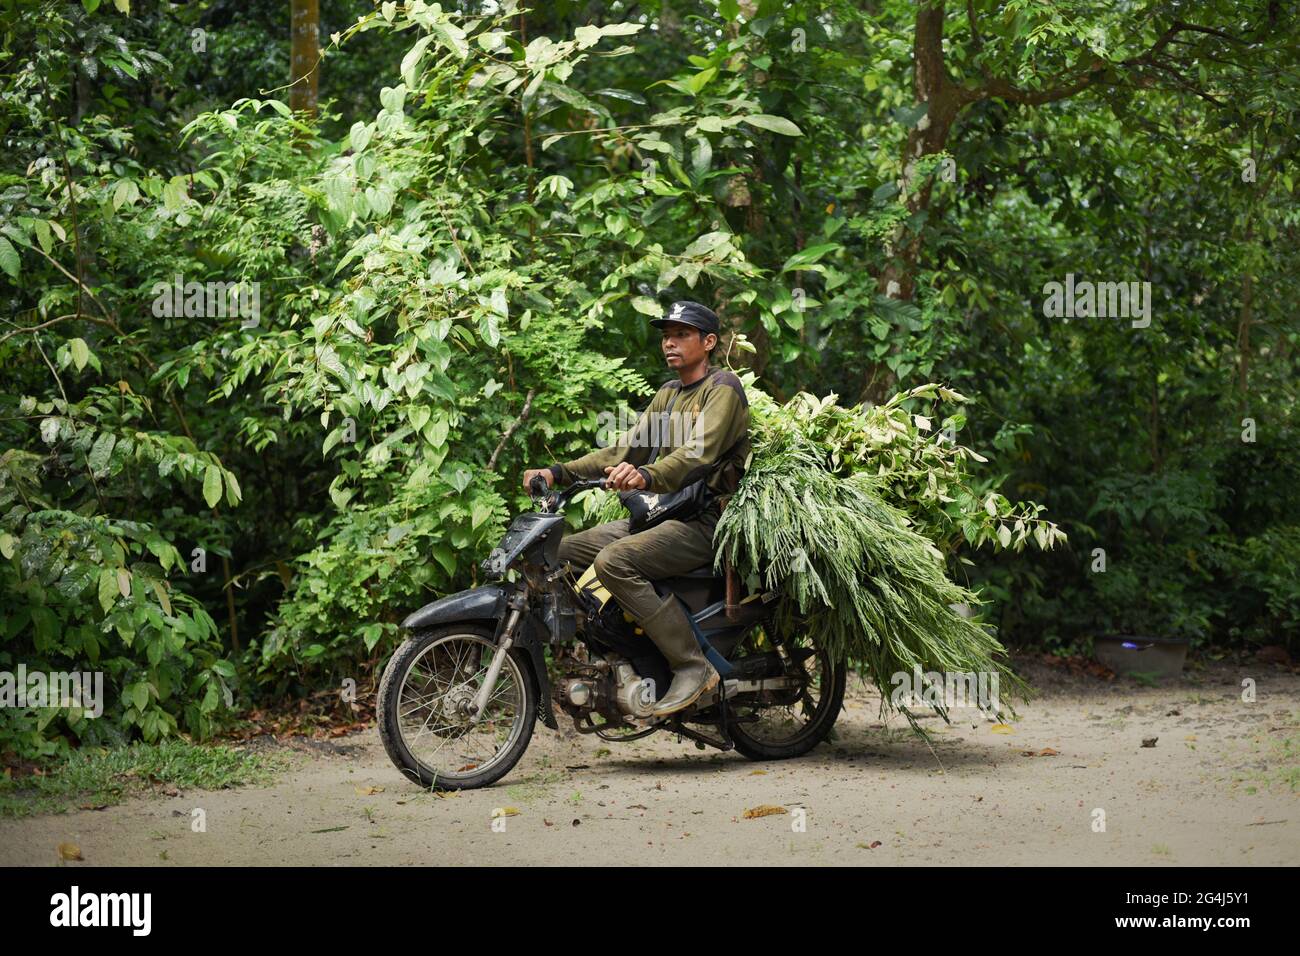 A national park ranger riding motorcycle, carrying tree leaves that are suitable to feed rhino at Sumatran Rhino Sanctuary in Way Kambas National Park, Lampung, Indonesia. Stock Photo